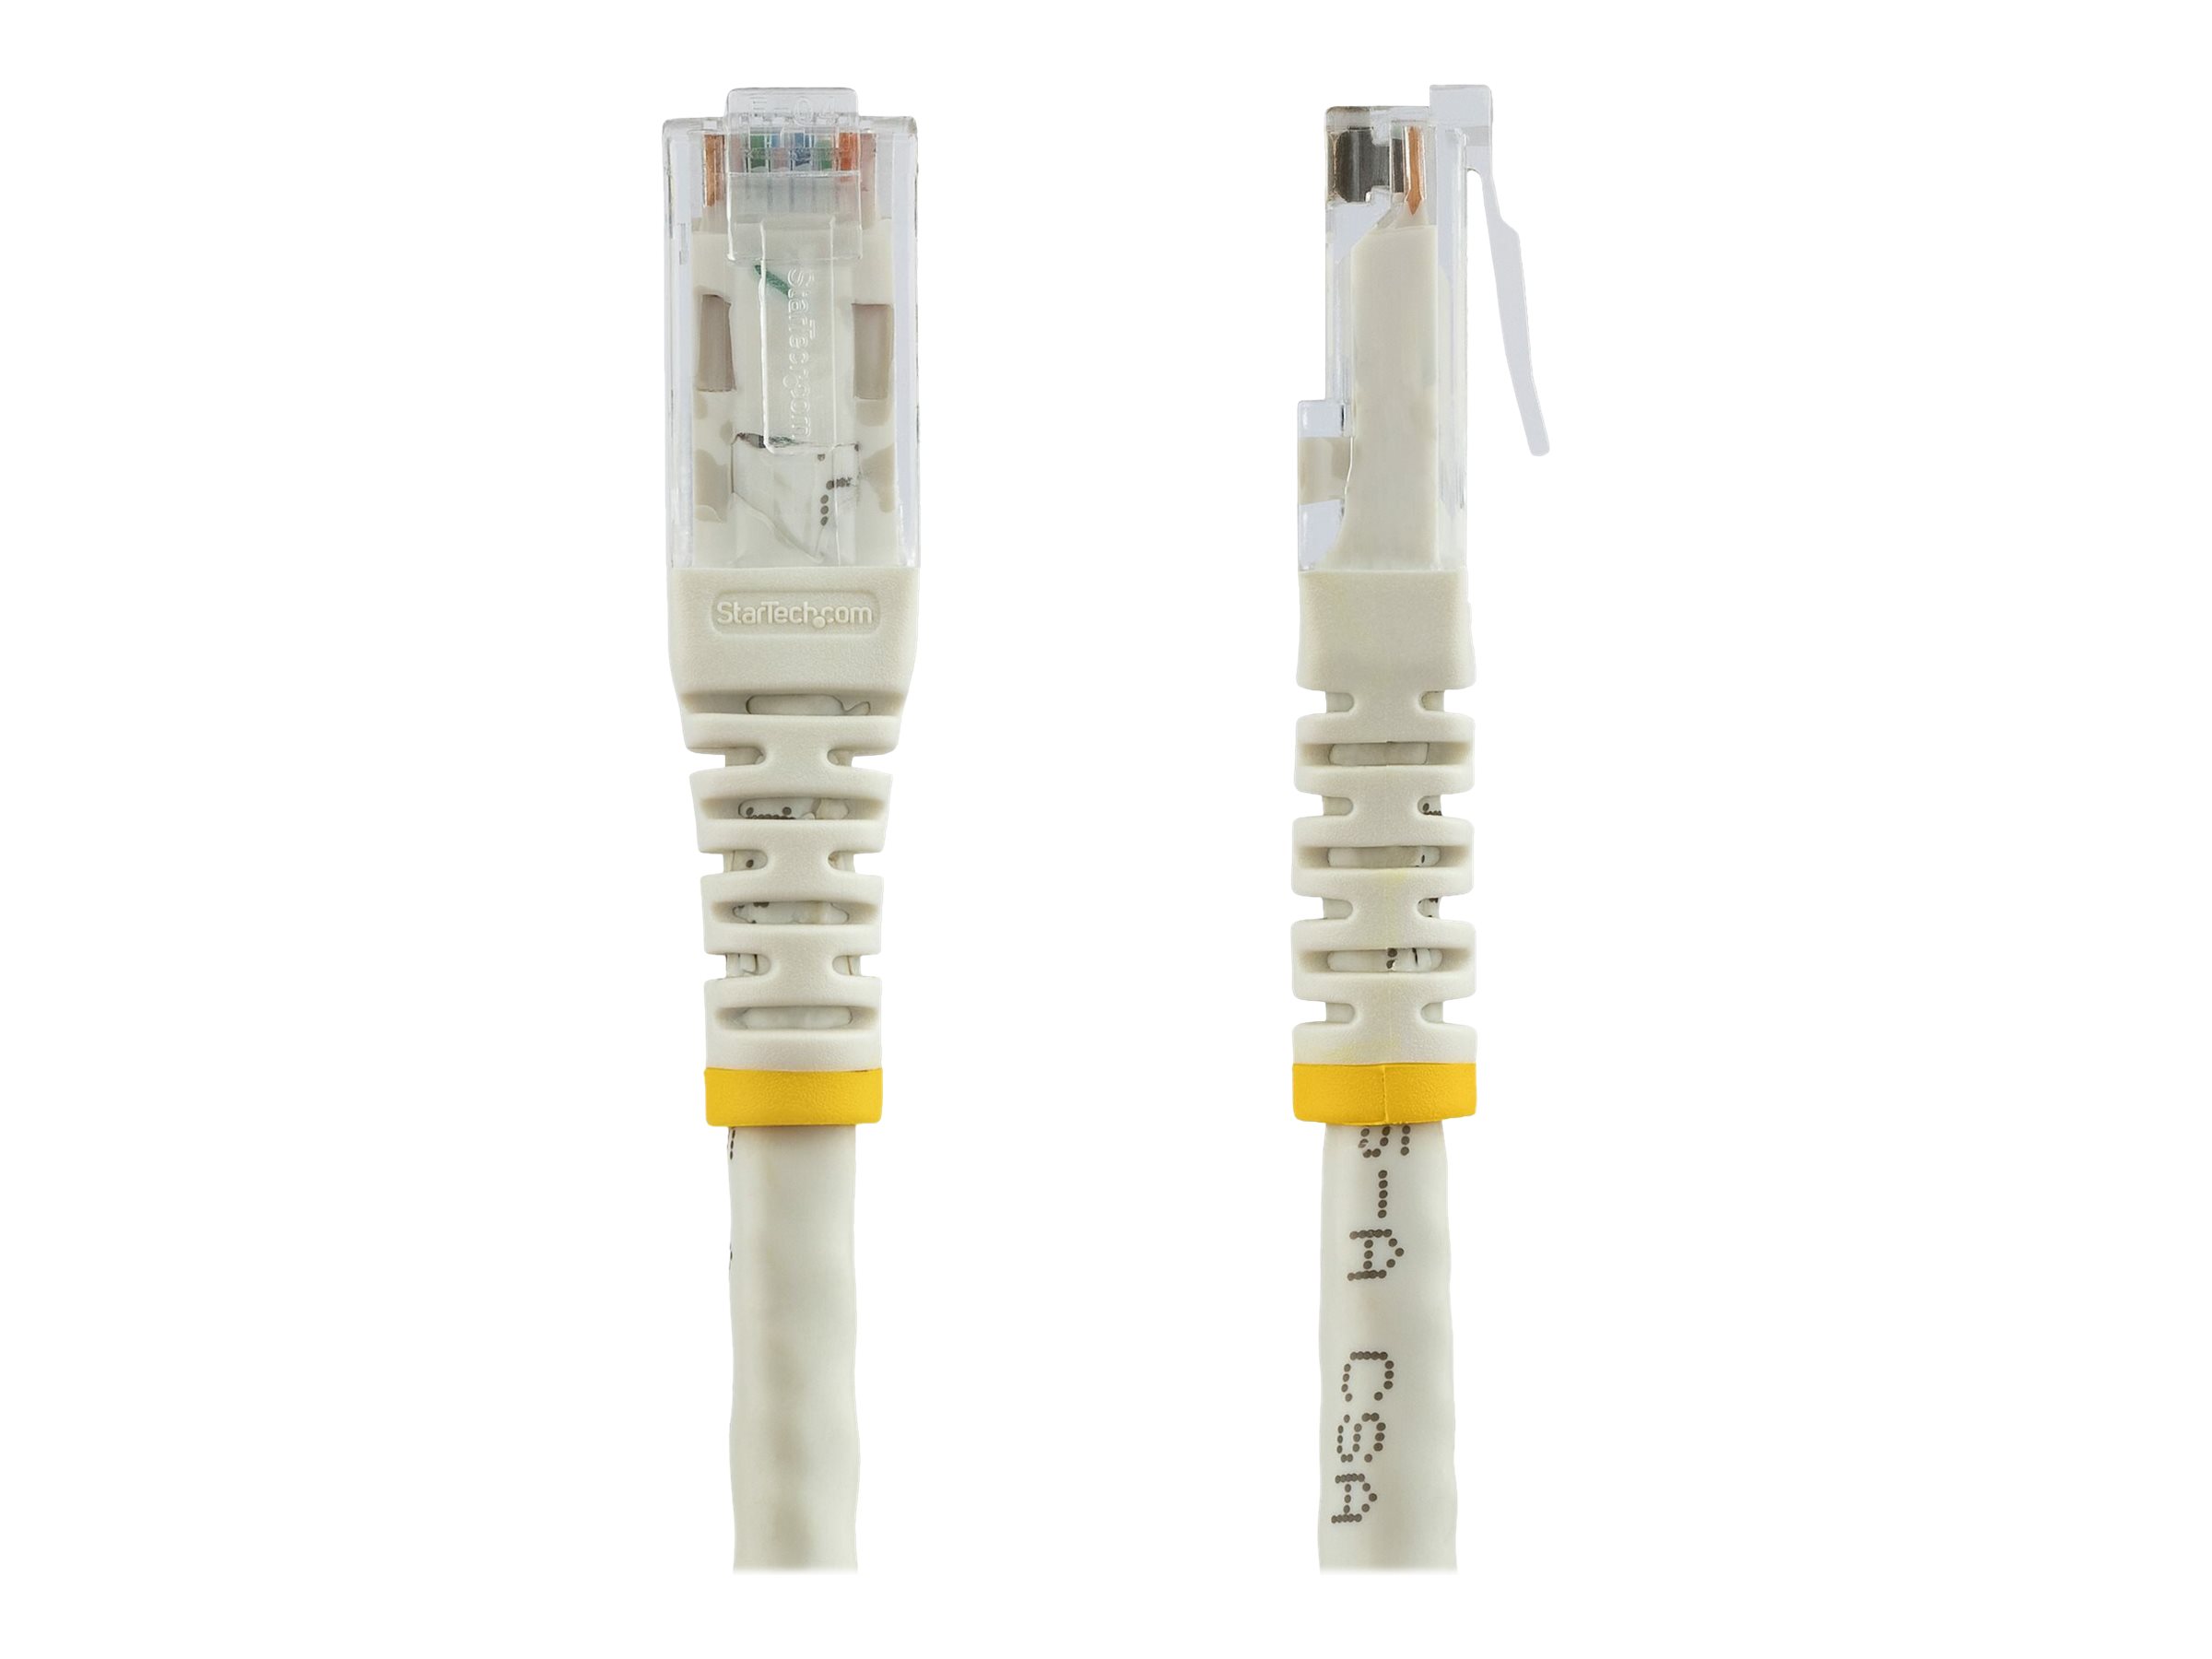 StarTech.com 1ft CAT6 Ethernet Cable, 10 Gigabit Molded RJ45 650MHz 100W PoE Patch Cord, CAT 6 10GbE UTP Network Cable with Strain Relief, White, Fluke Tested/Wiring is UL Certified/TIA